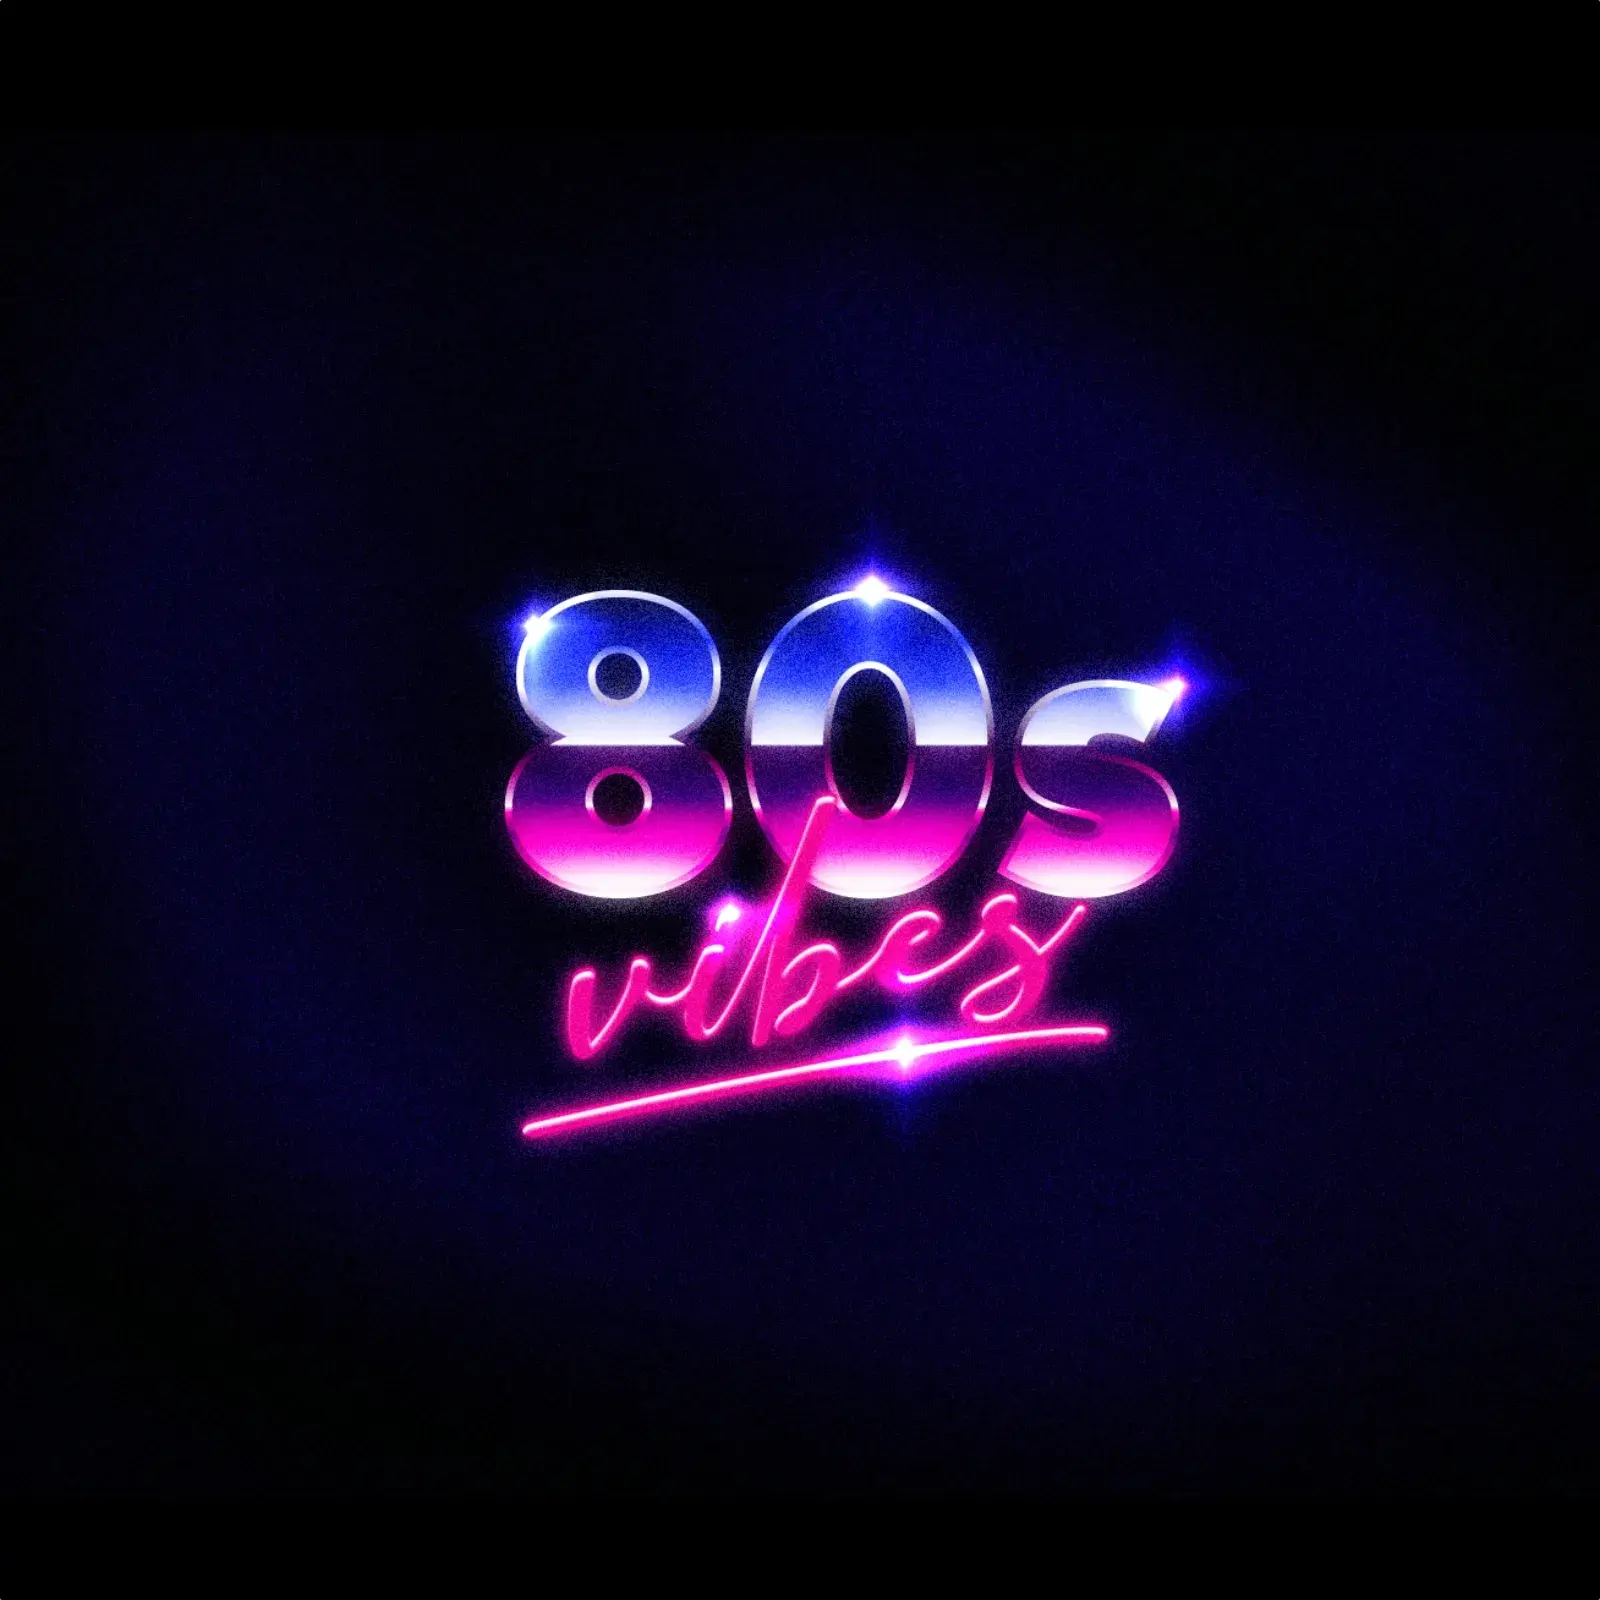 Figma 80s style logotype — easy tutorial for nostalgic effects